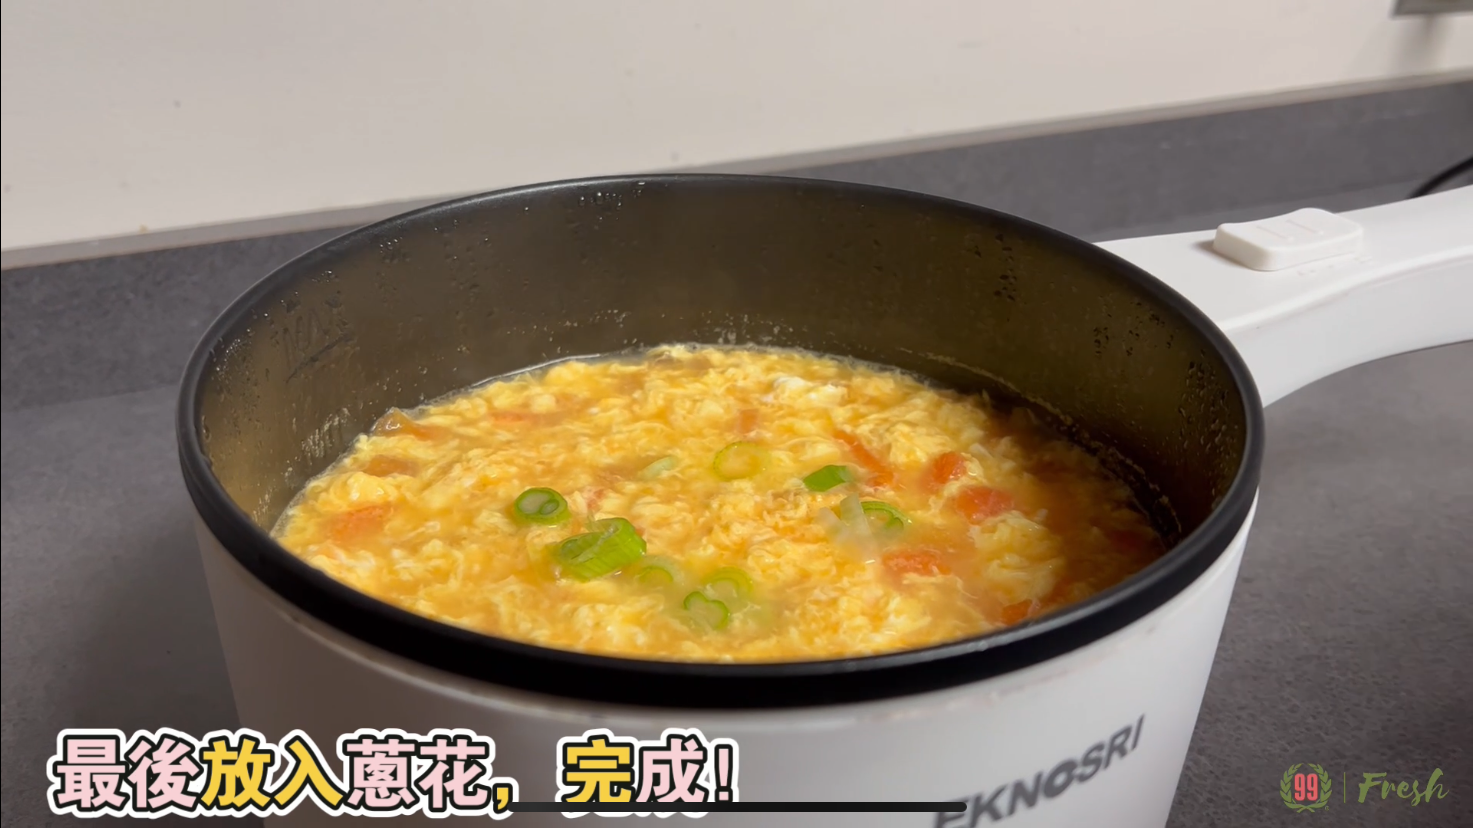 Image of Tomato and Egg Drop Soup